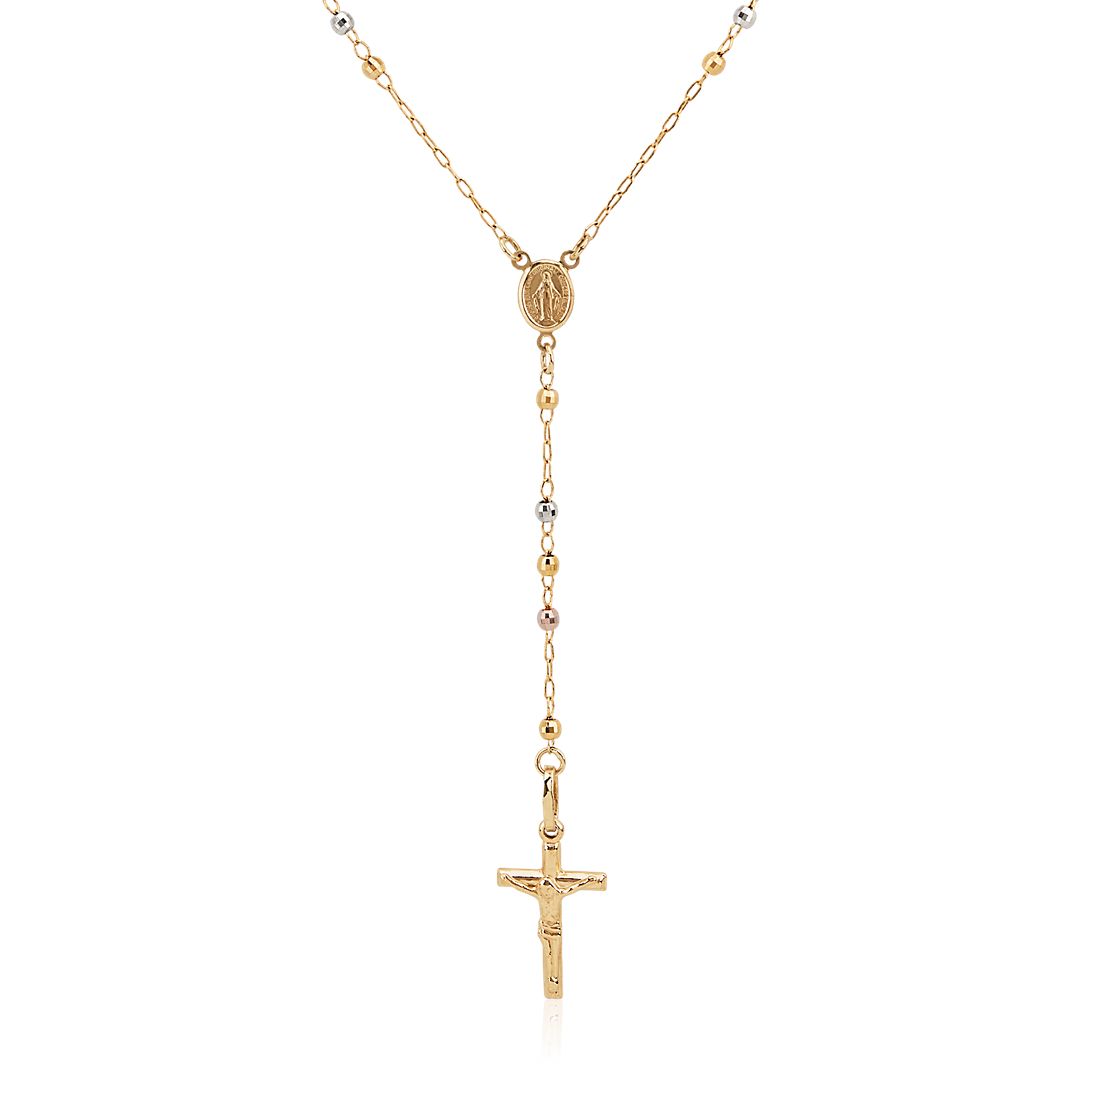 24" Polished Rosary Necklace in 14k Yellow, White, and Rose Gold